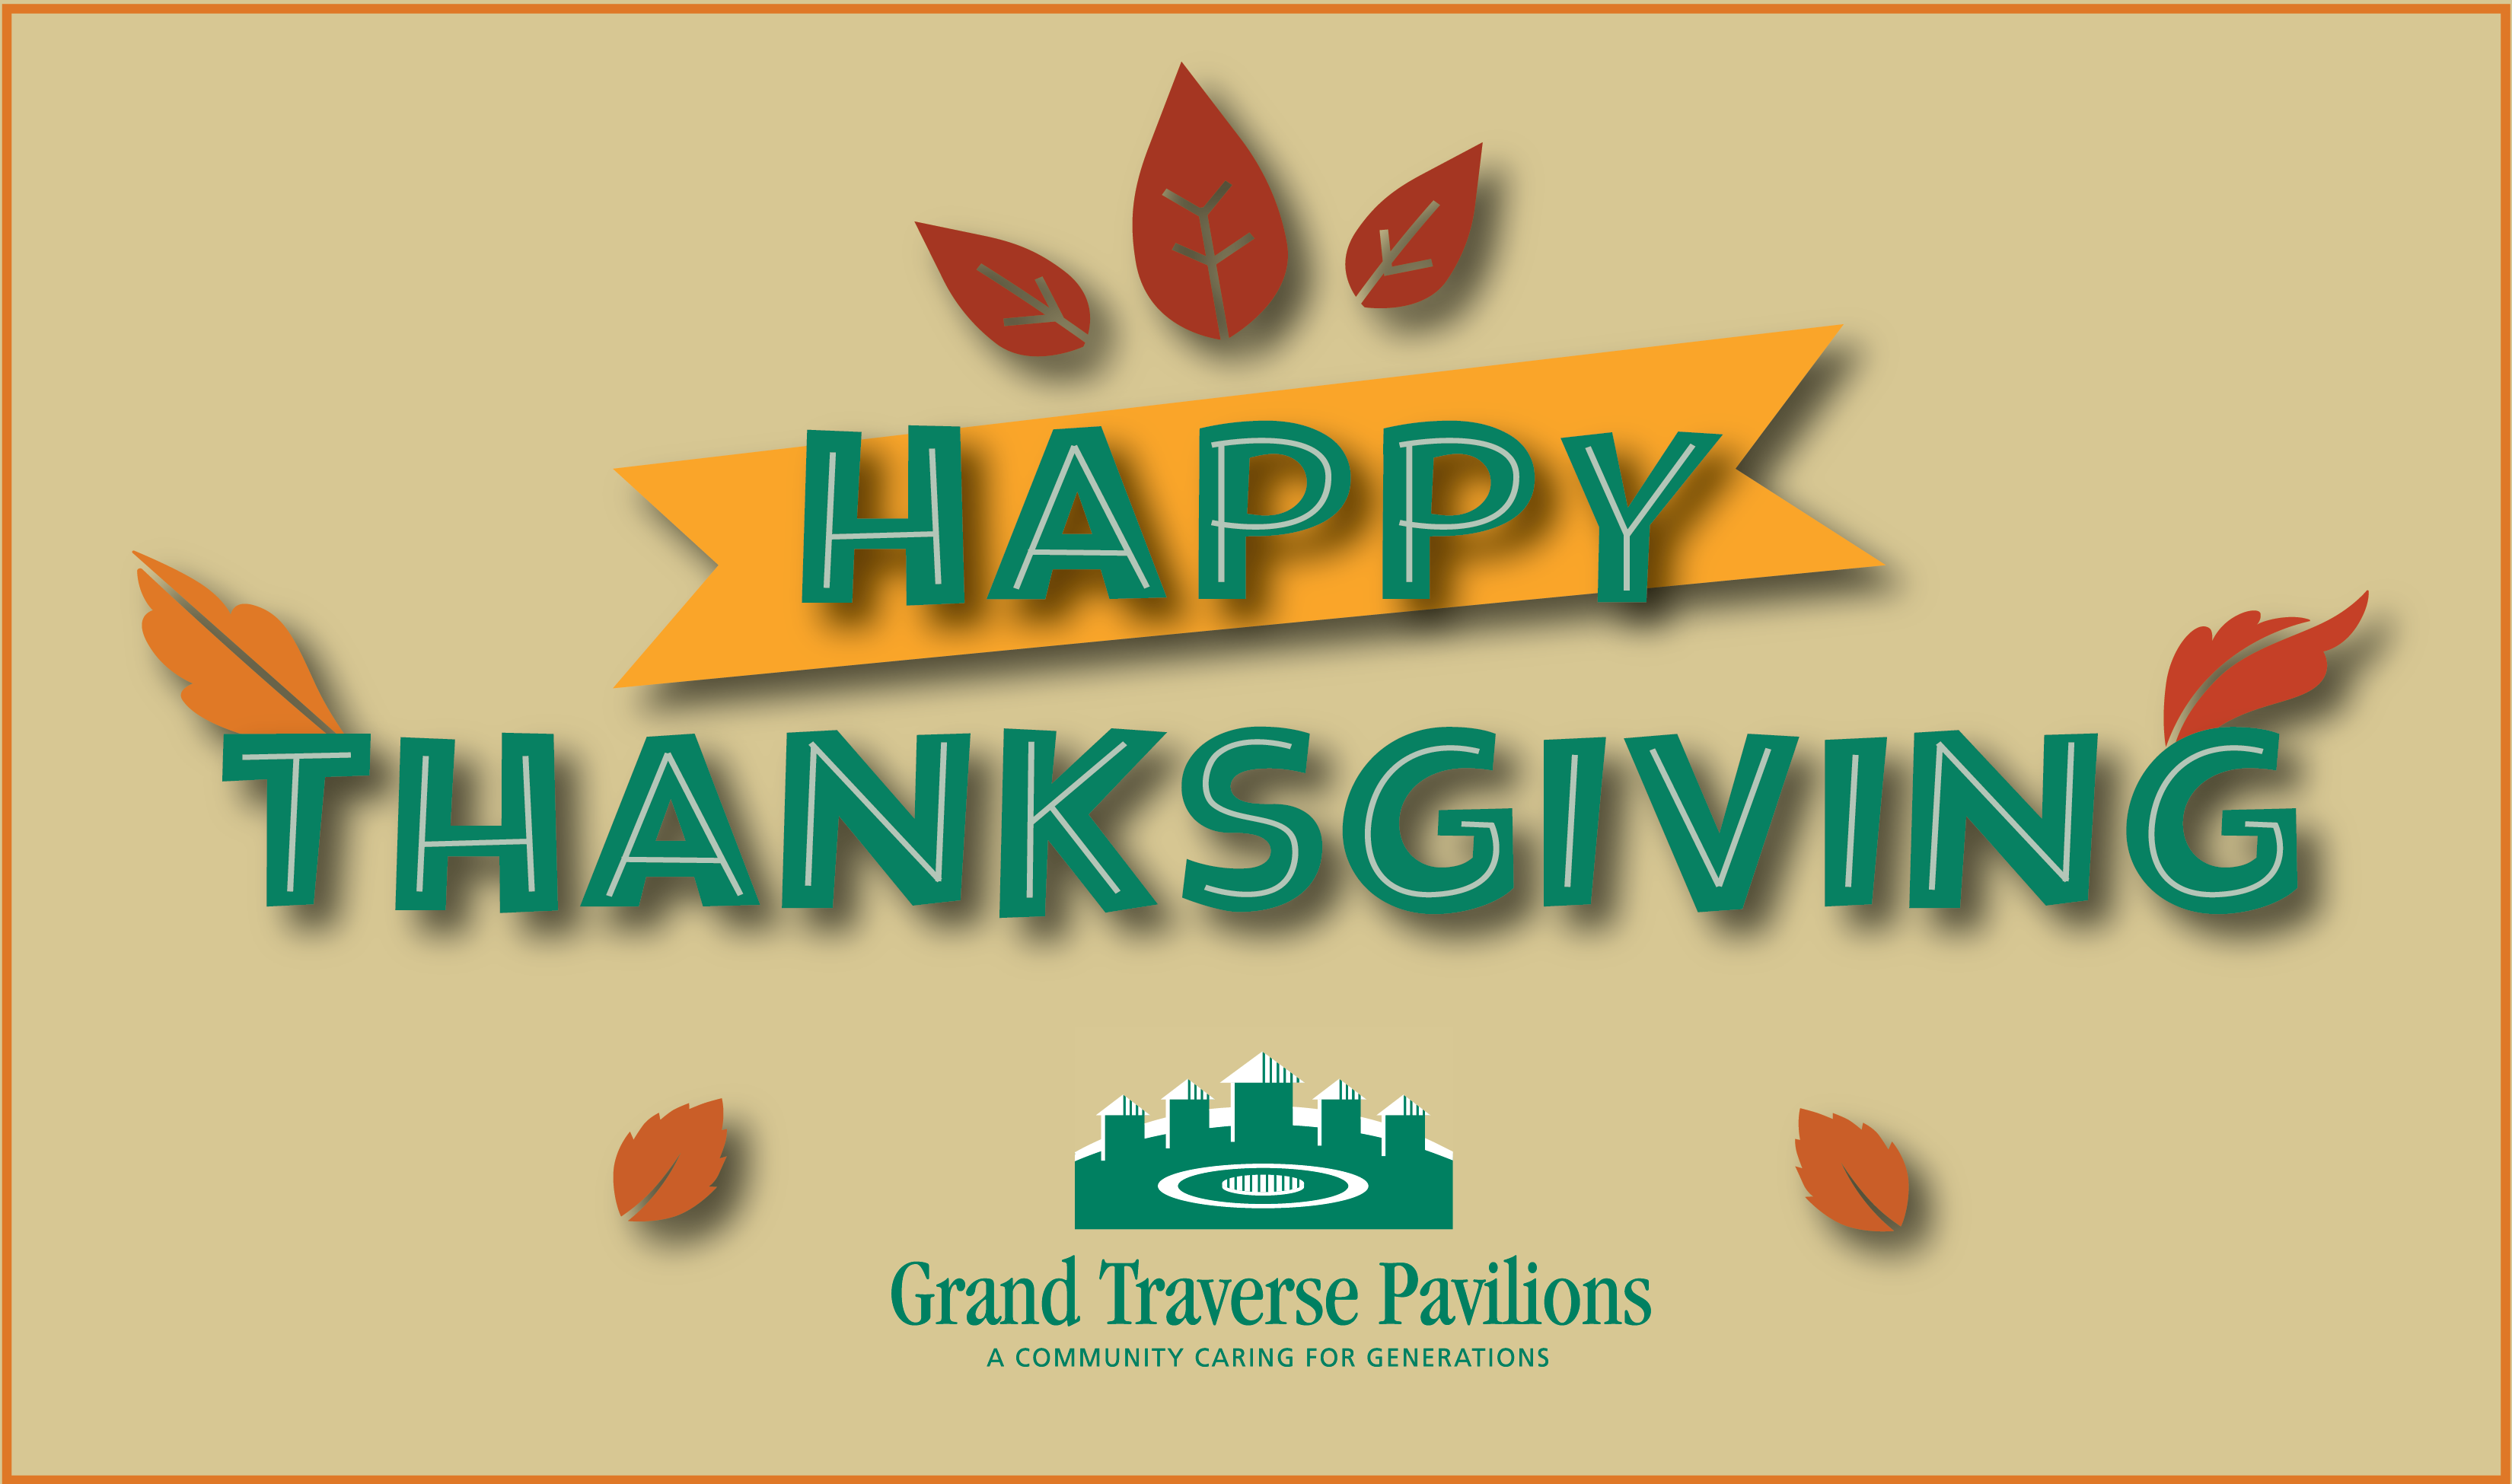 Happy Thanksgiving from Grand Traverse Pavilions